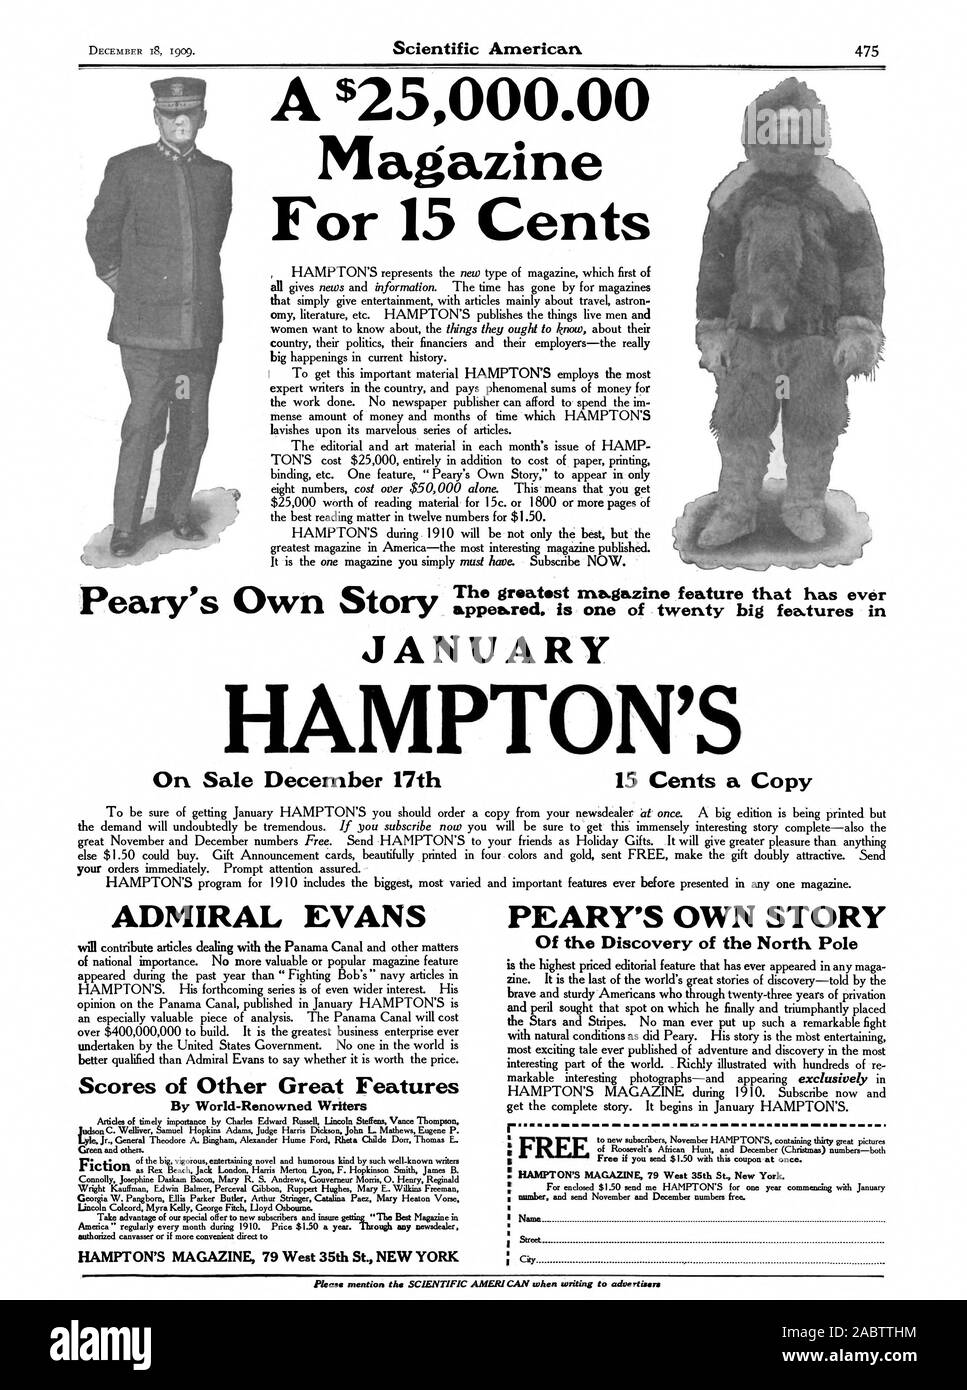 A $25000.00 Magazine For 15 Cents The greatest magazine feature that has ever JANUARY HAMPTON'S On Sale December 17th 15 Cents a Copy ADMIRAL EVANS Scores of Other Great Features By World-Renowned Writers Lyle Jr. General Theodore A. Bingham Alexander Hume Ford Rheta Childe Dorr Thomas E. Green and others. as Rex Beach Jack London Harris Merton Lyon F. Hopkinson Smith James B. Connolly Josephine Daskam Bacon Mary R. S. Andrews Gouverneur Morris O. Henry Reginald Wright Kauffman Edwin Balmer Perceval Gibbon Ruppert Hughes Mary E. Wilkins Freeman HAMPTON'S MAGAZINE 79 West 35th St. NEW YORK Stock Photo